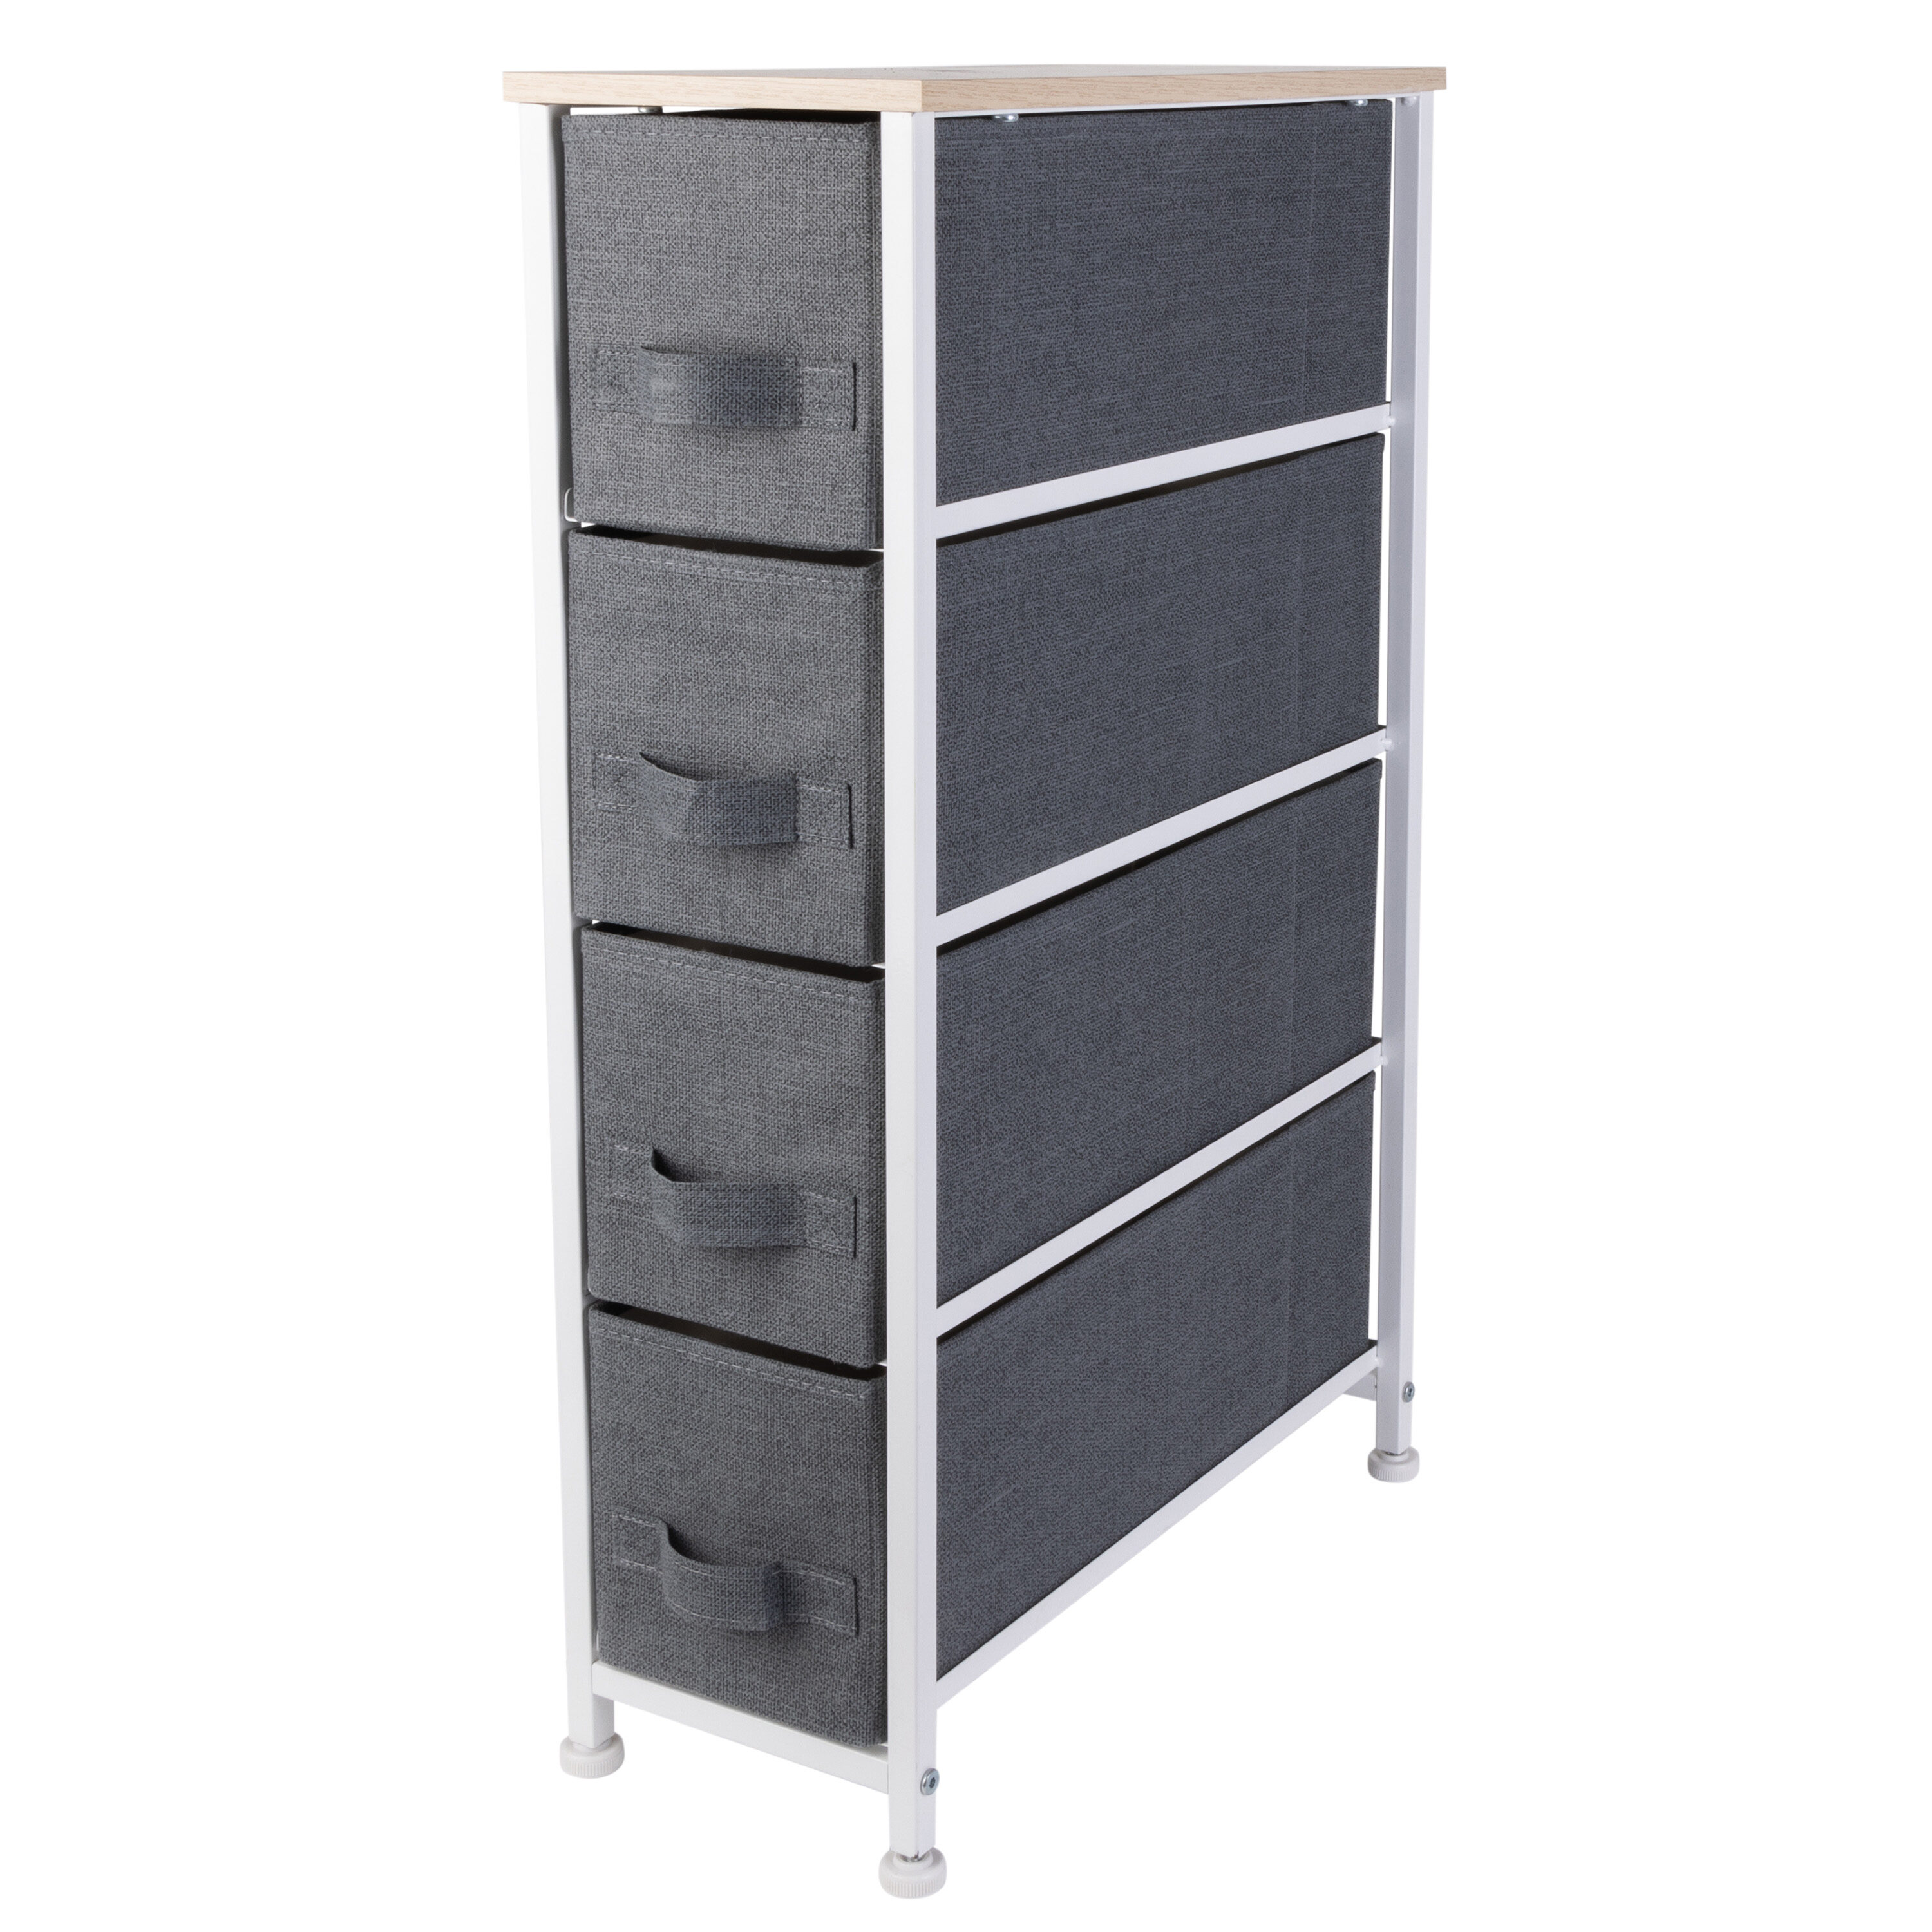 Home Basics Grey Storage Drawer Tower 9.25-in H x 6.8-in W x 5.25-in D